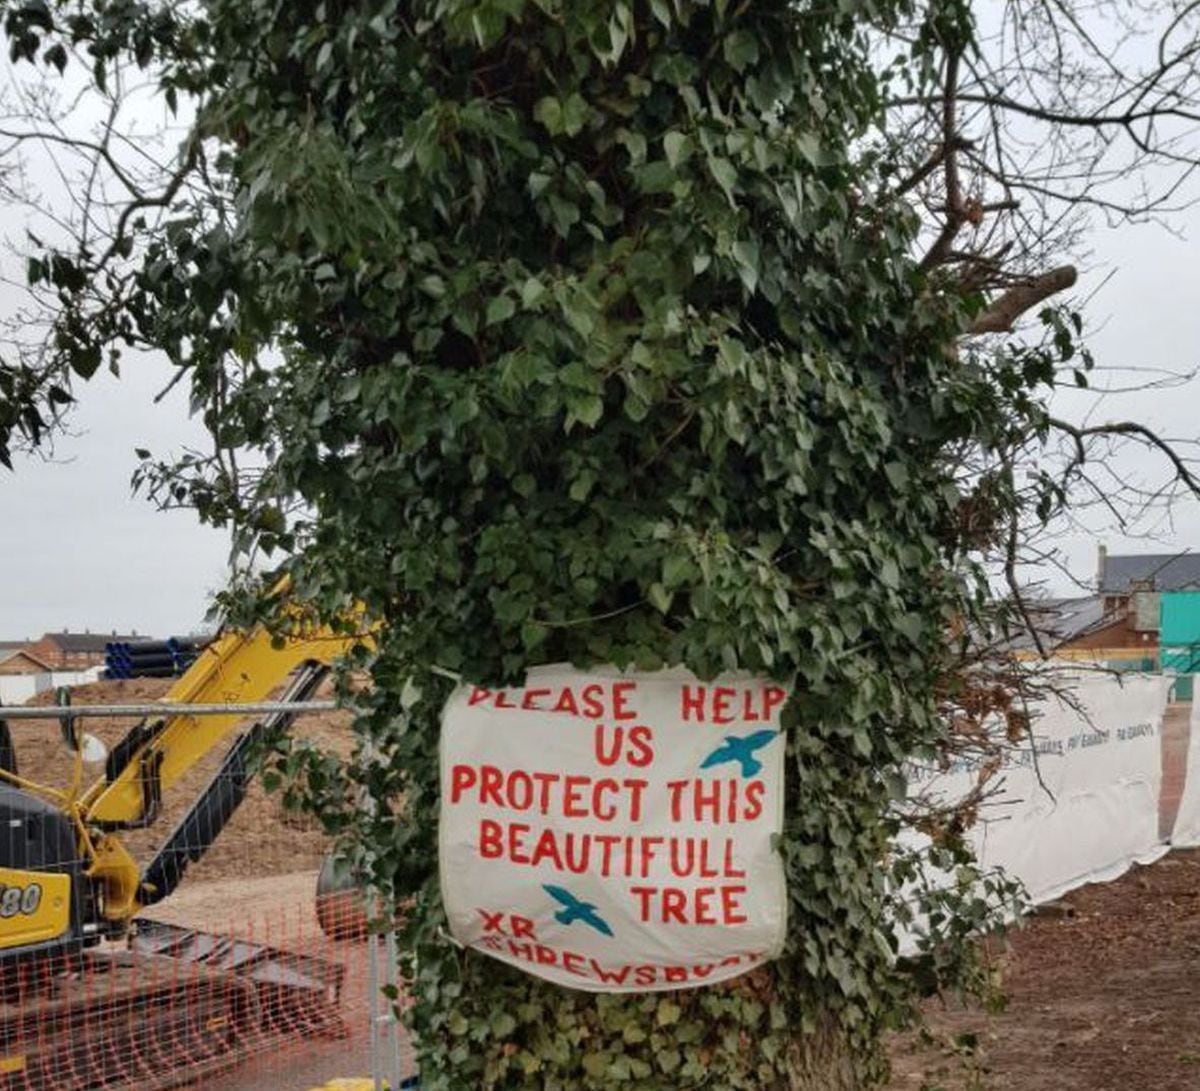 A sign on the tree in Harlescott